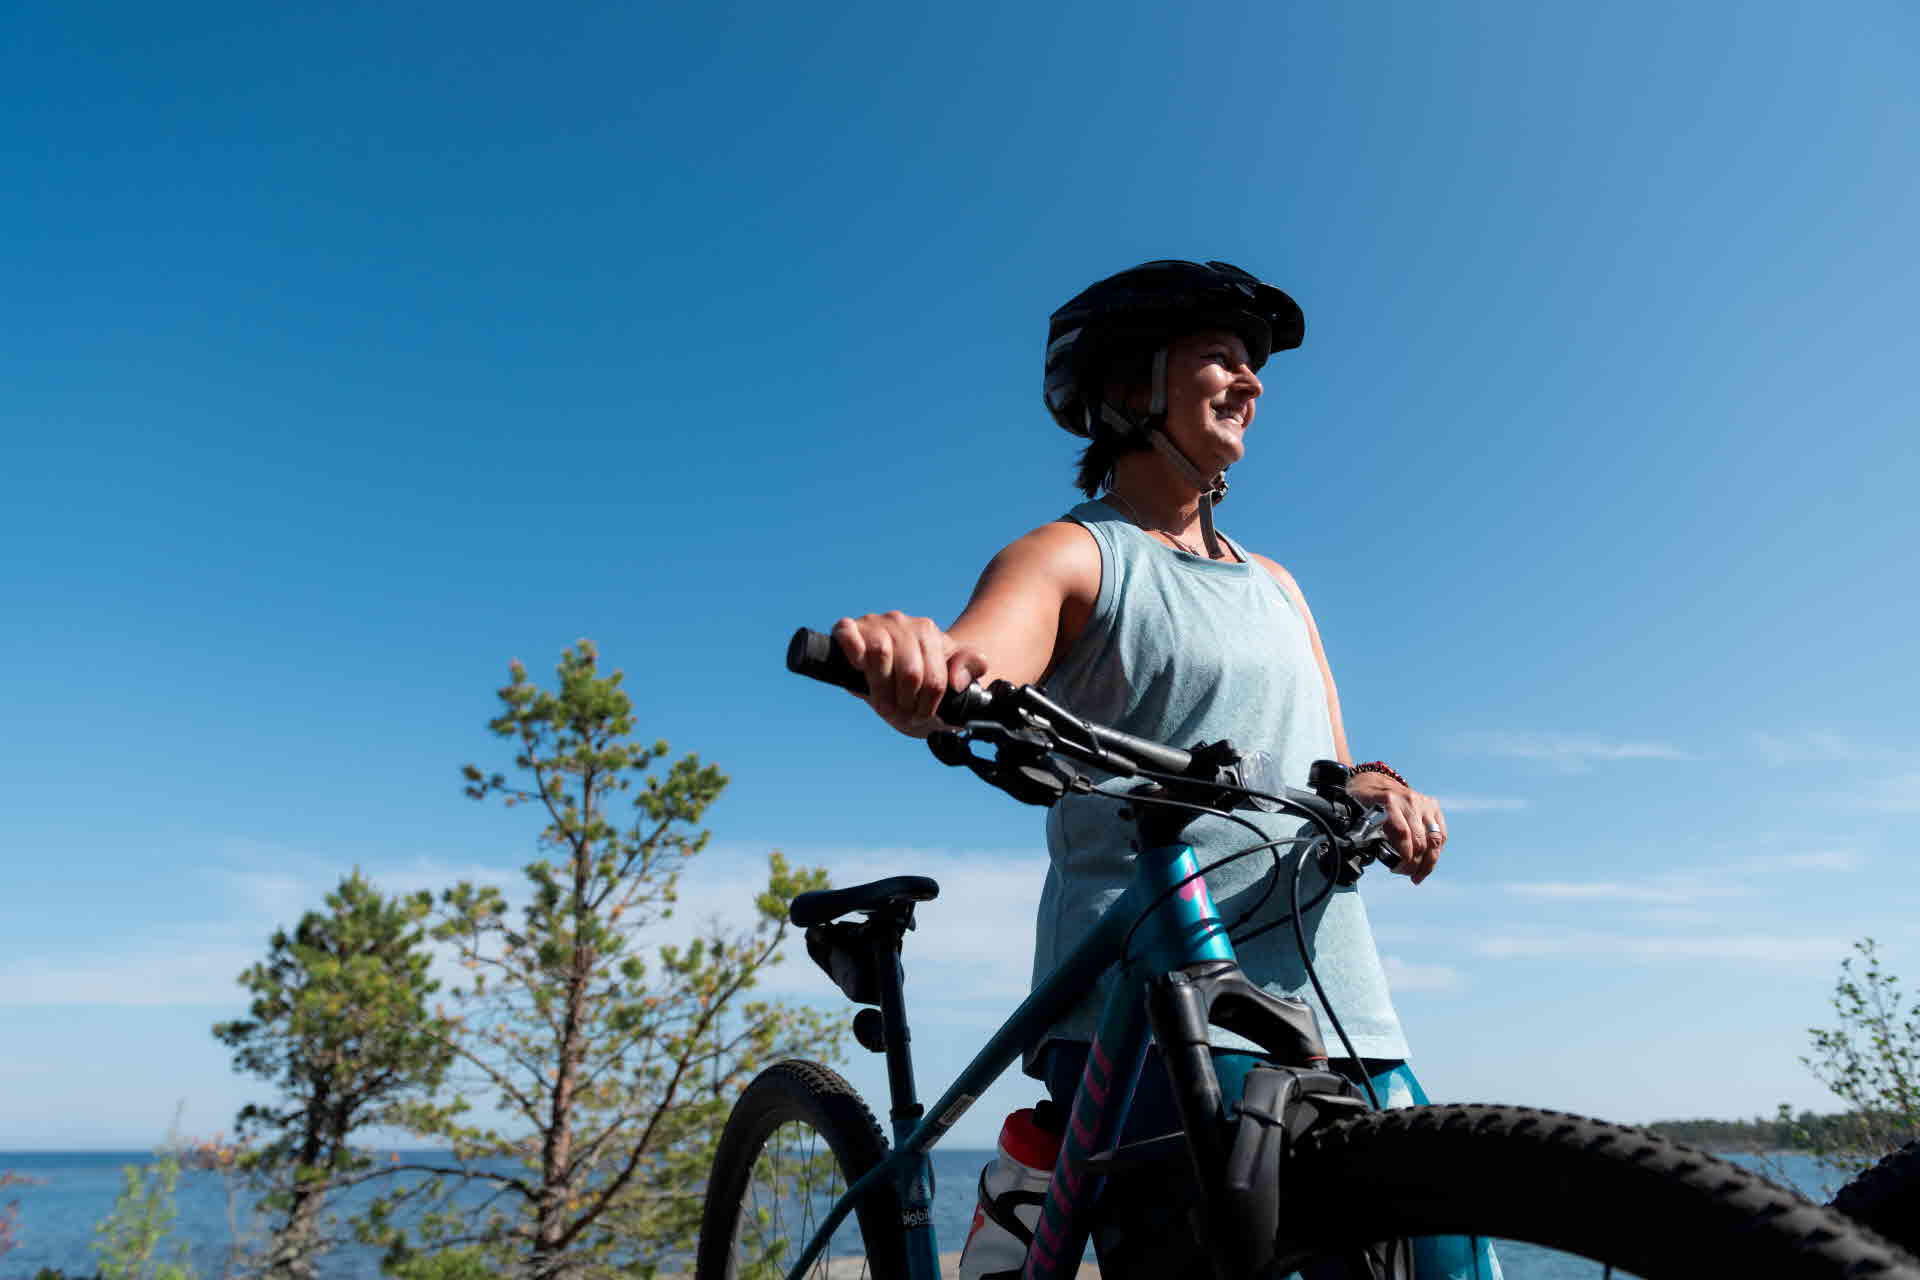 A person standing next to a bicycle, wearing a bike helmet, with the ocean in the background.